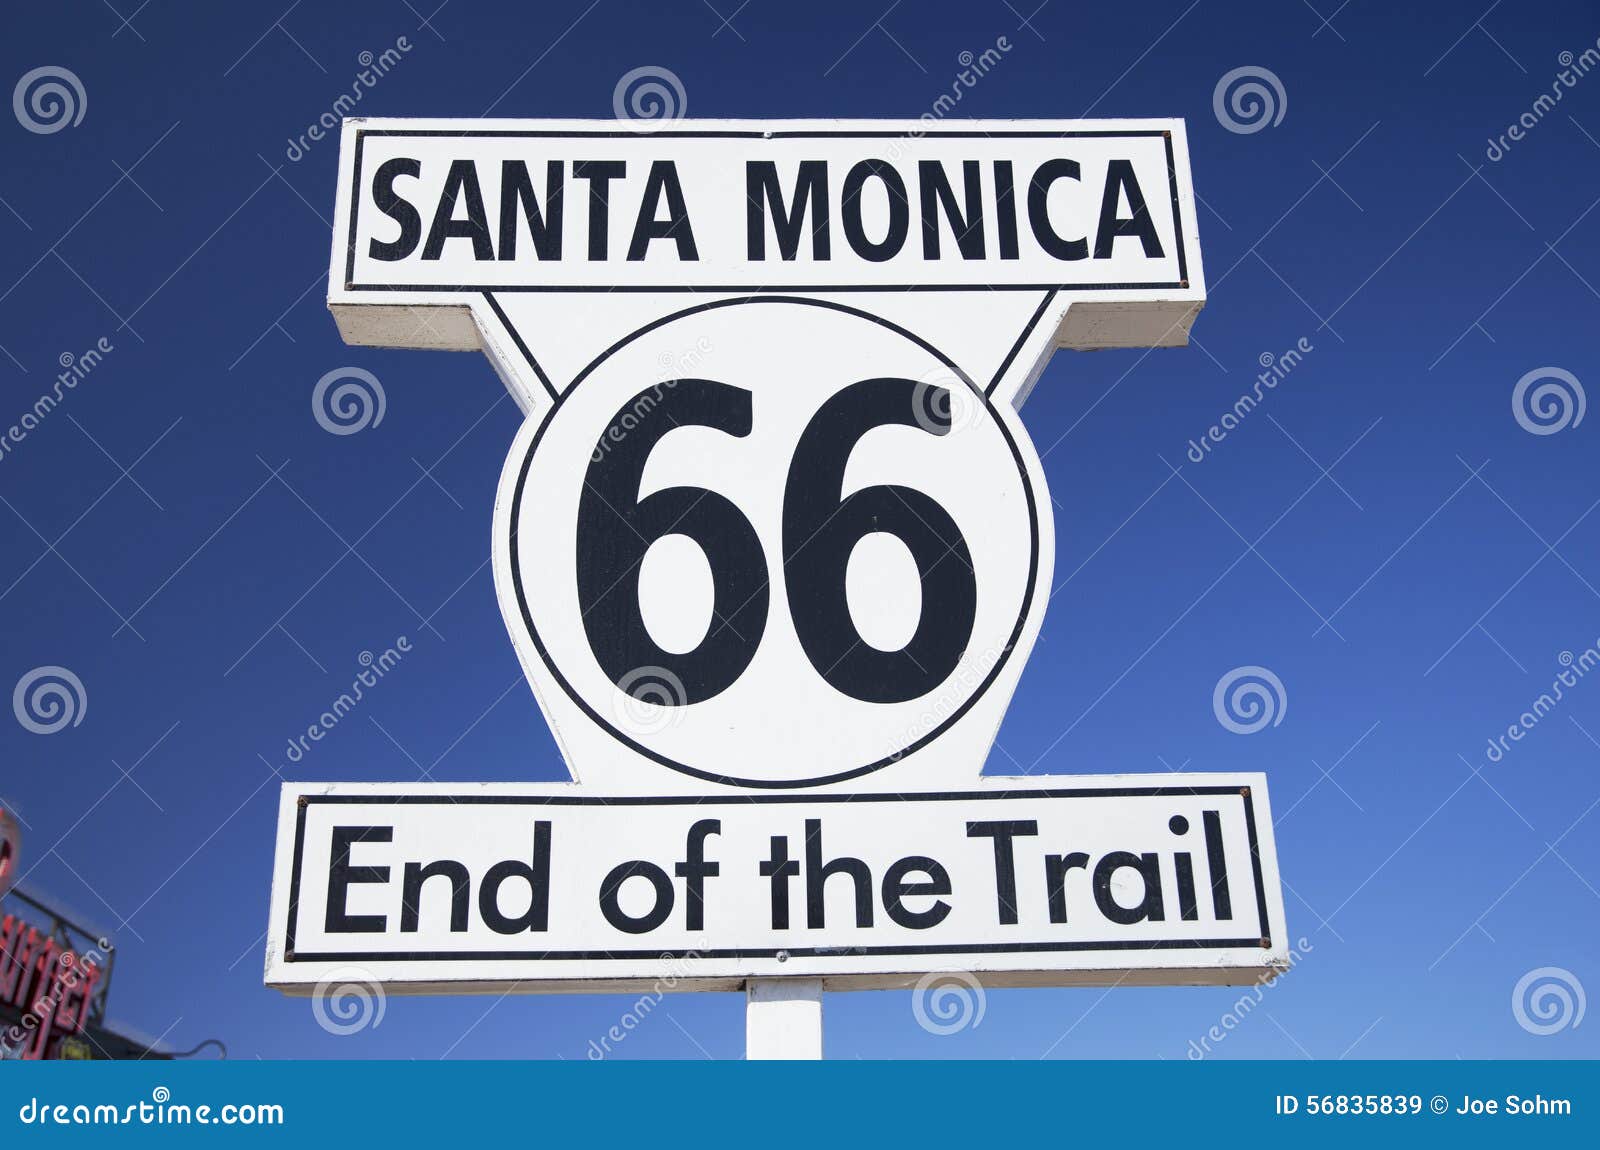 santa monica, california, usa 5/2/2015, route 66 sign santa monica pier, end of famous route 66 highway from chicago